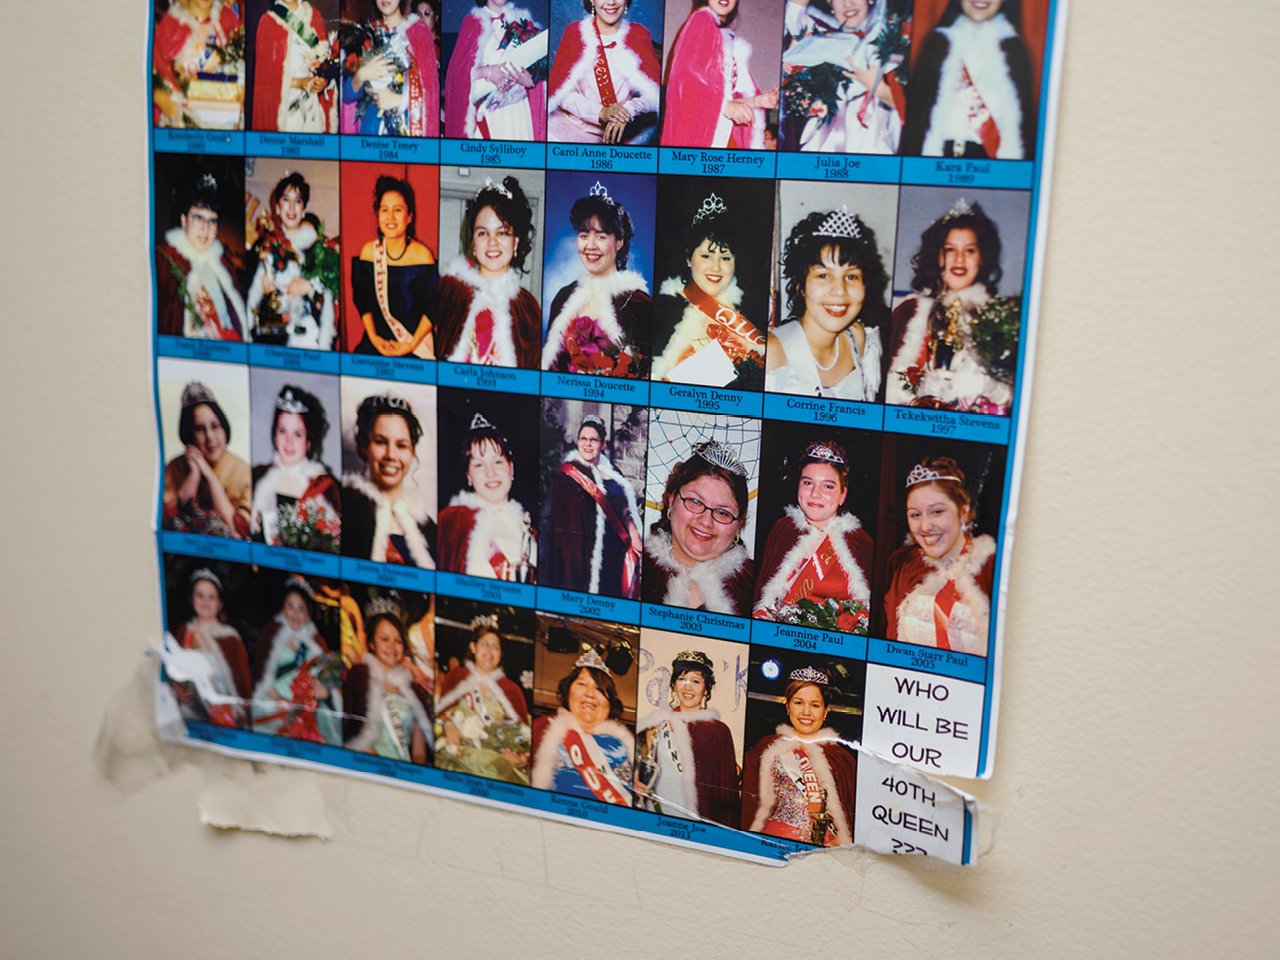 A photo of a poster depicting previous Princess Pageant winners